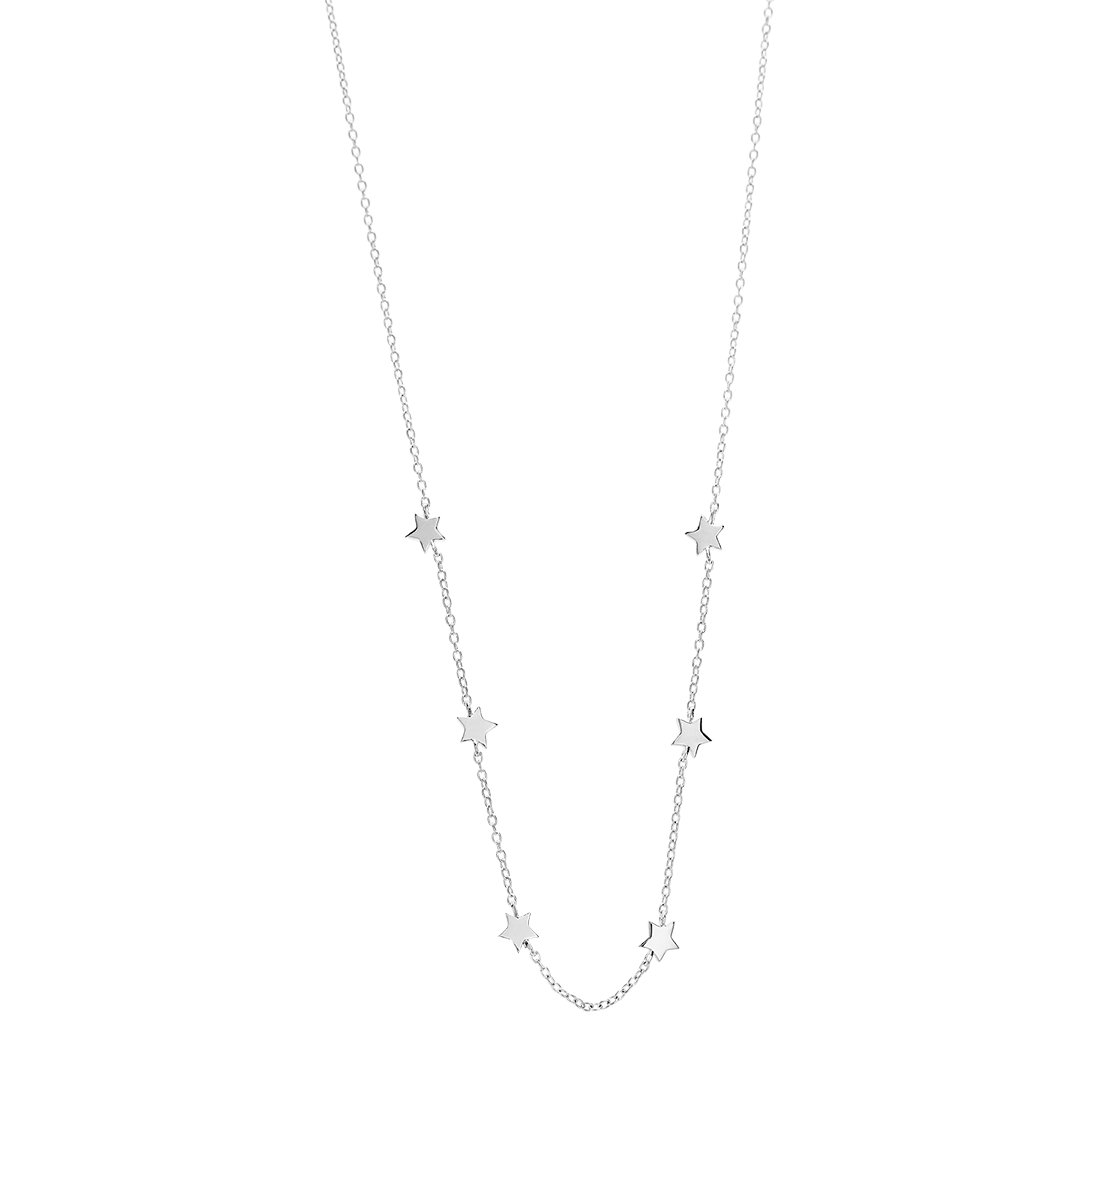 LITTLE STAR NECKLACE (STERLING SILVER) - IMAGE 1